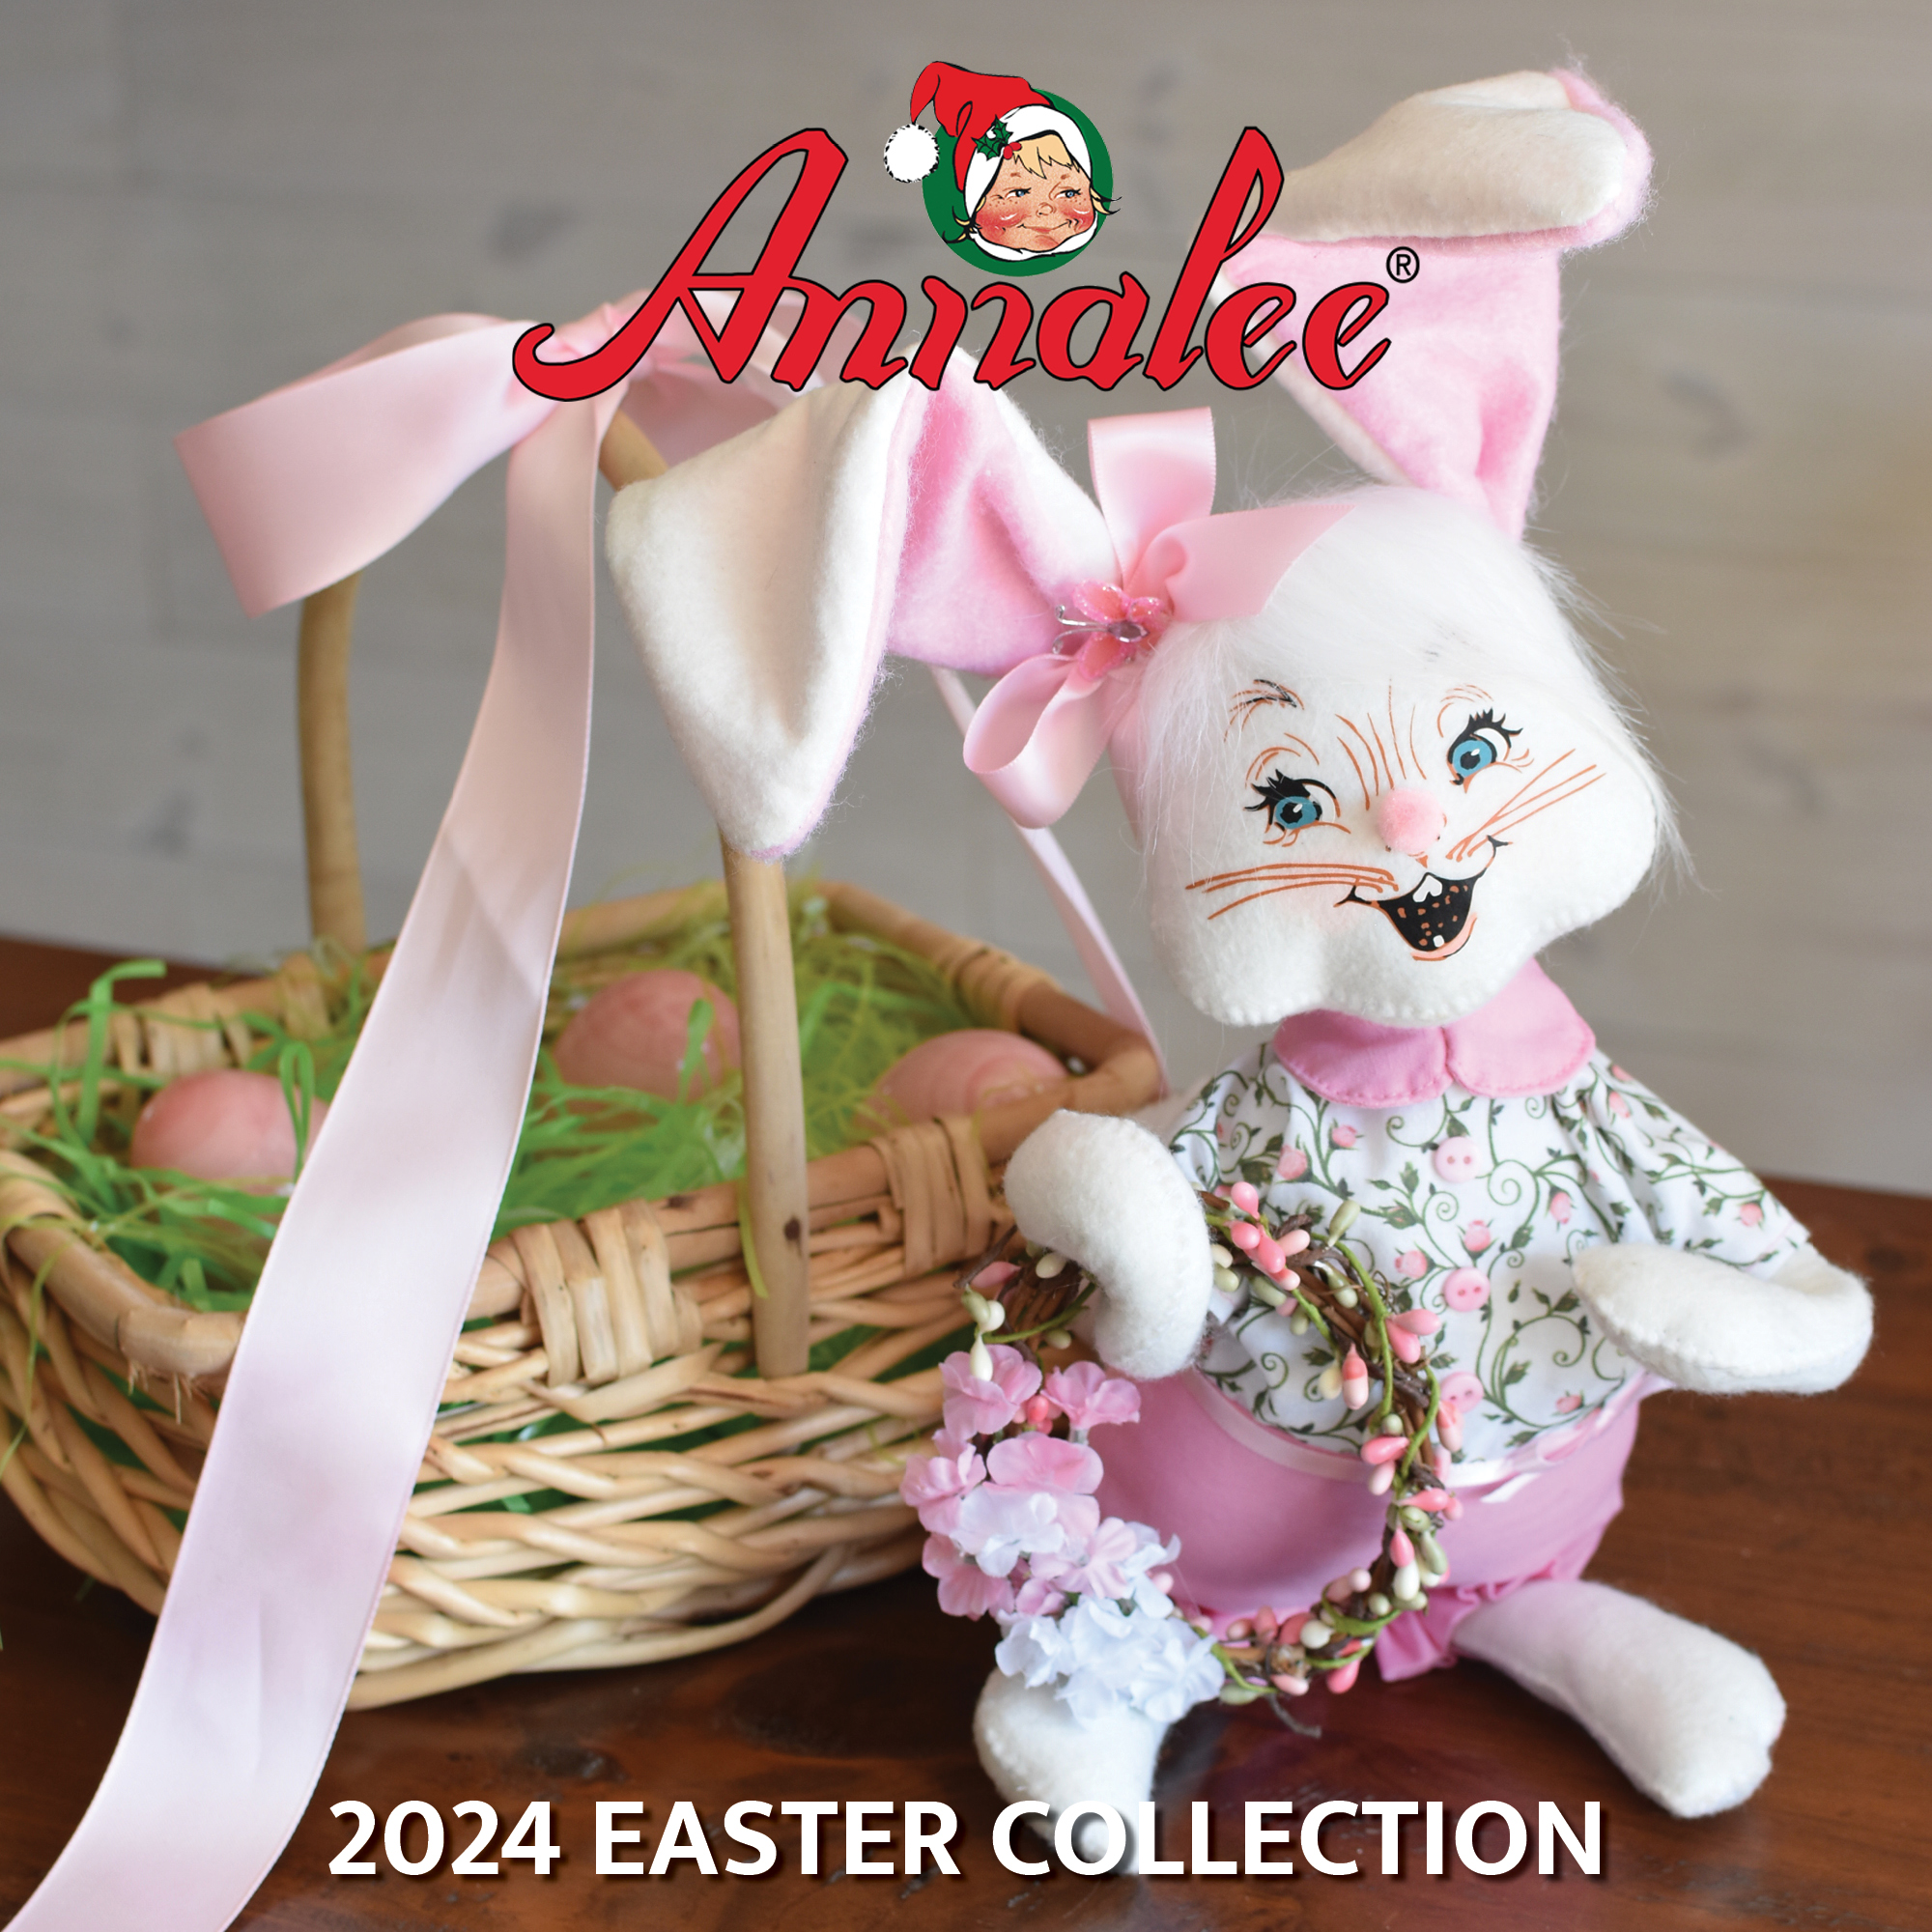 2024 Easter Catalog from Annalee